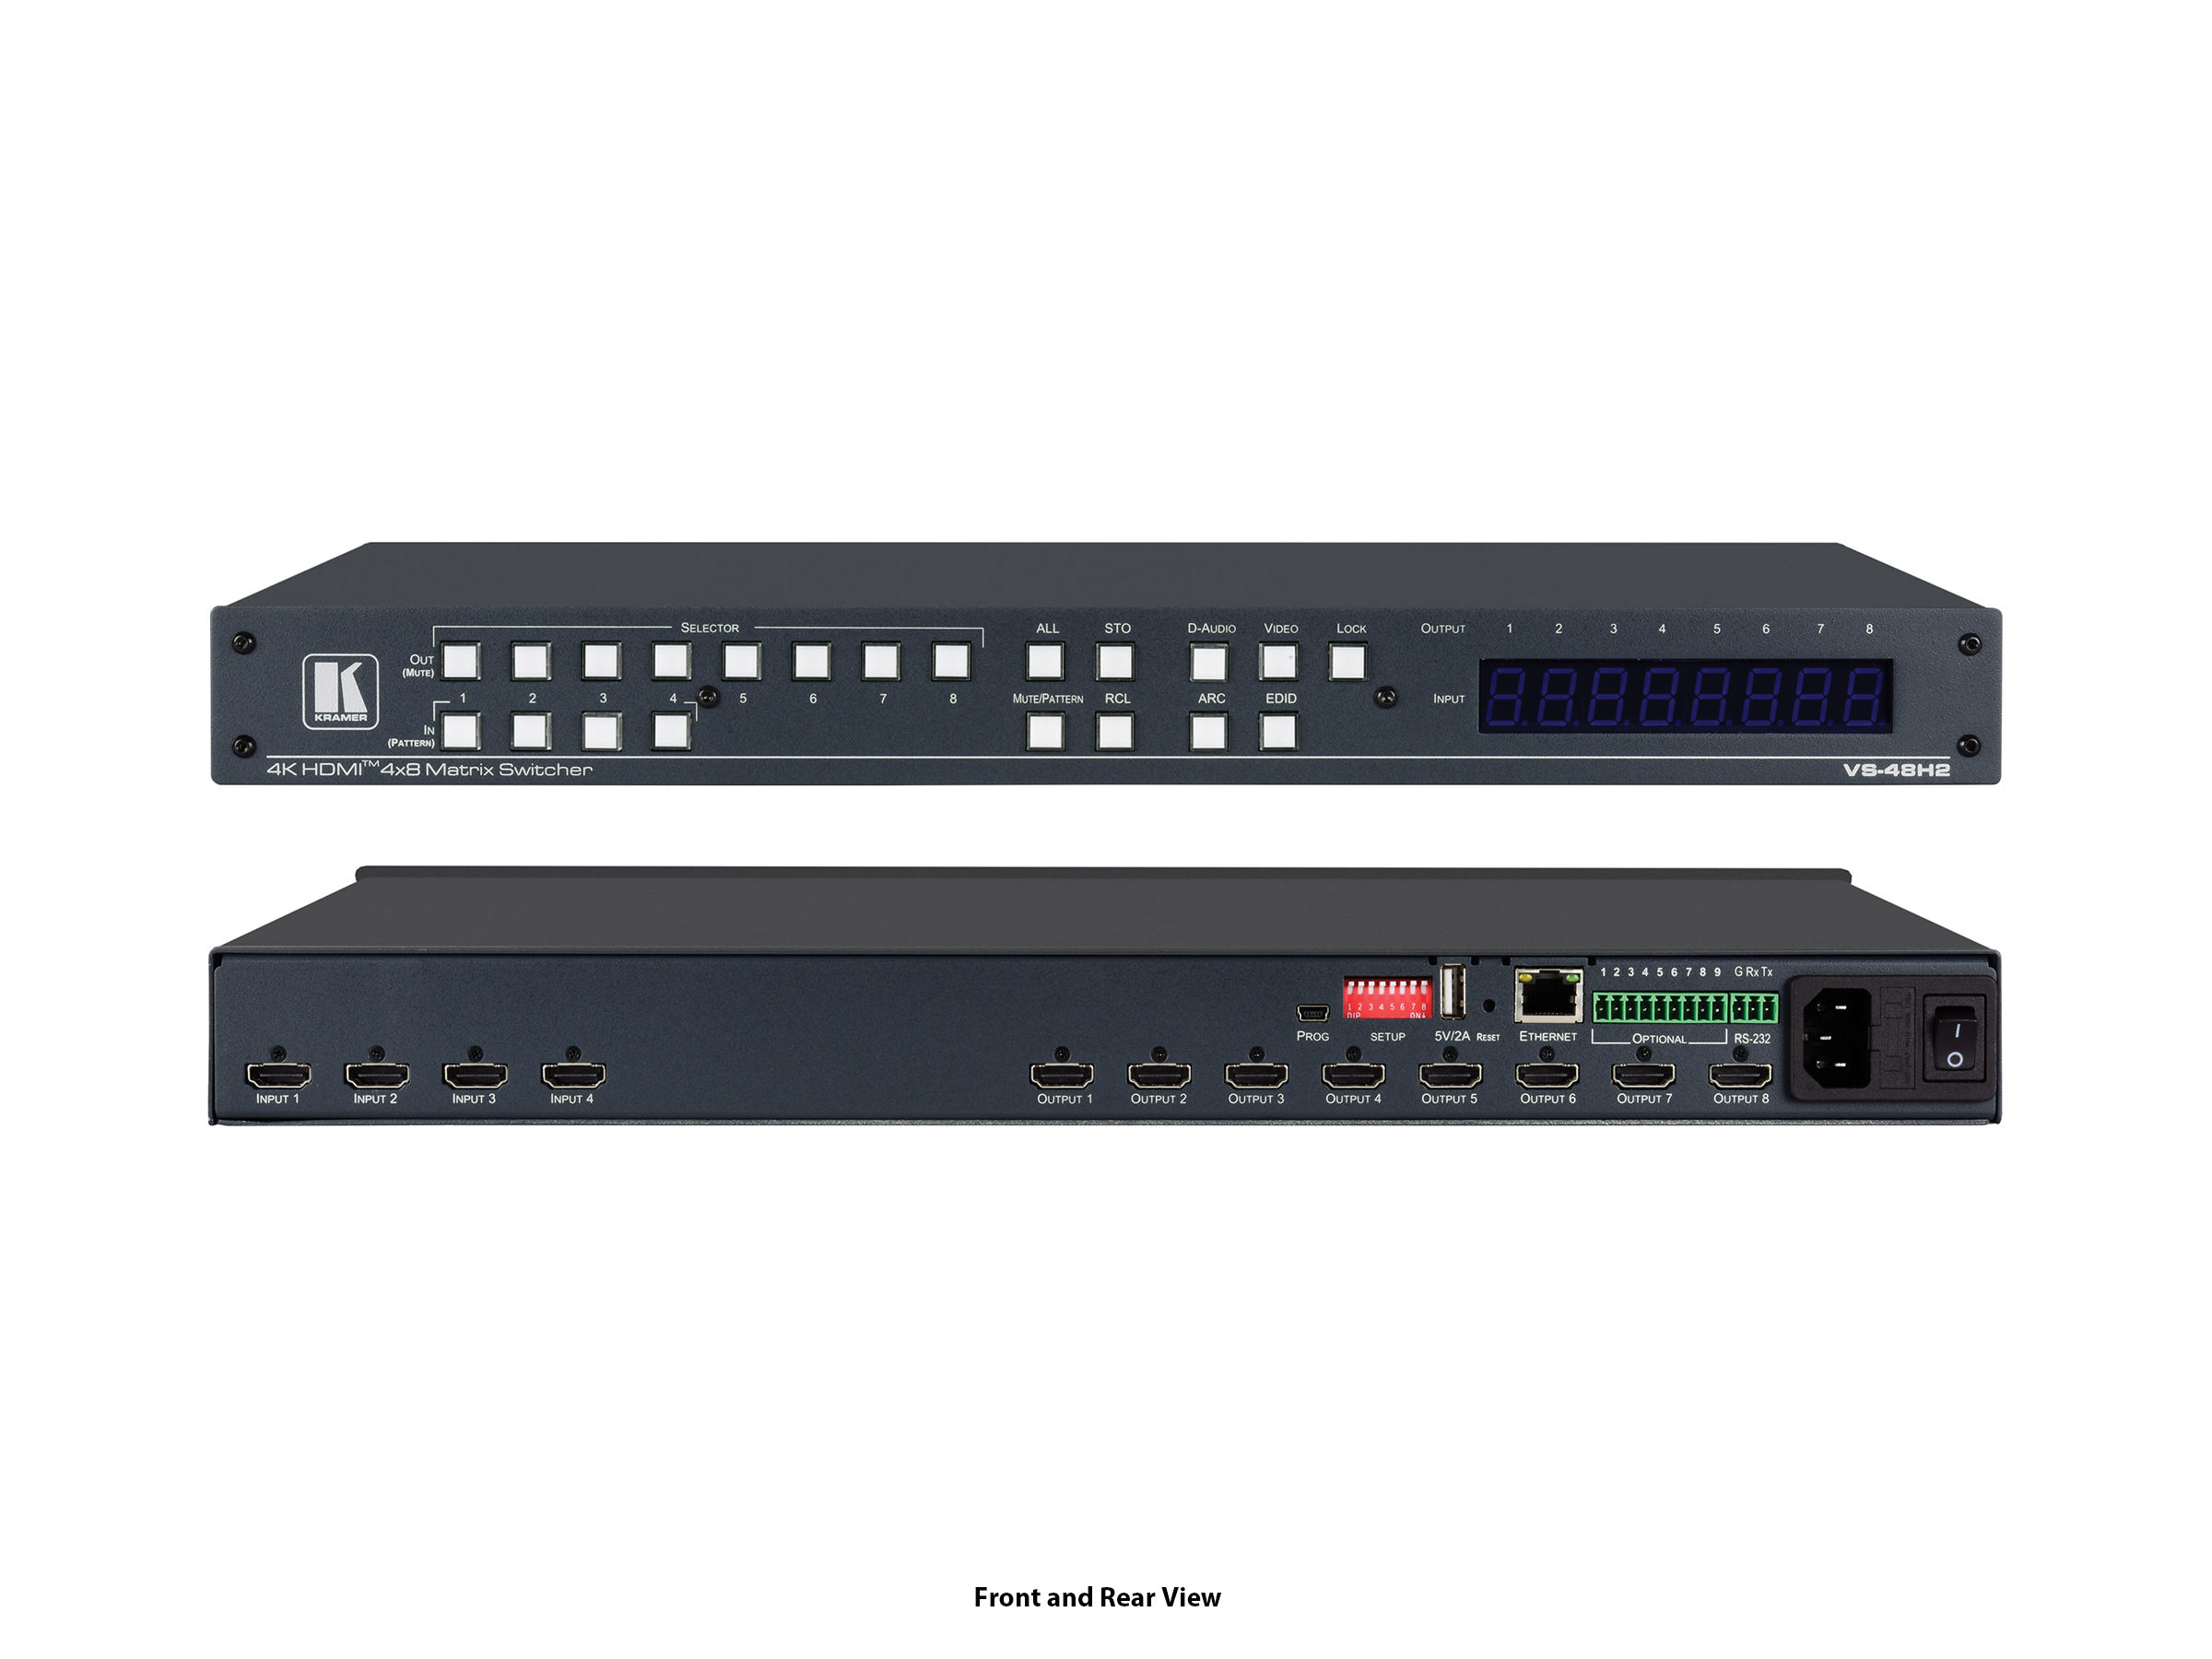 VS-48H2 4x8 4K HDR HDCP 2.2 Matrix Switcher with Digital Audio Routing by Kramer